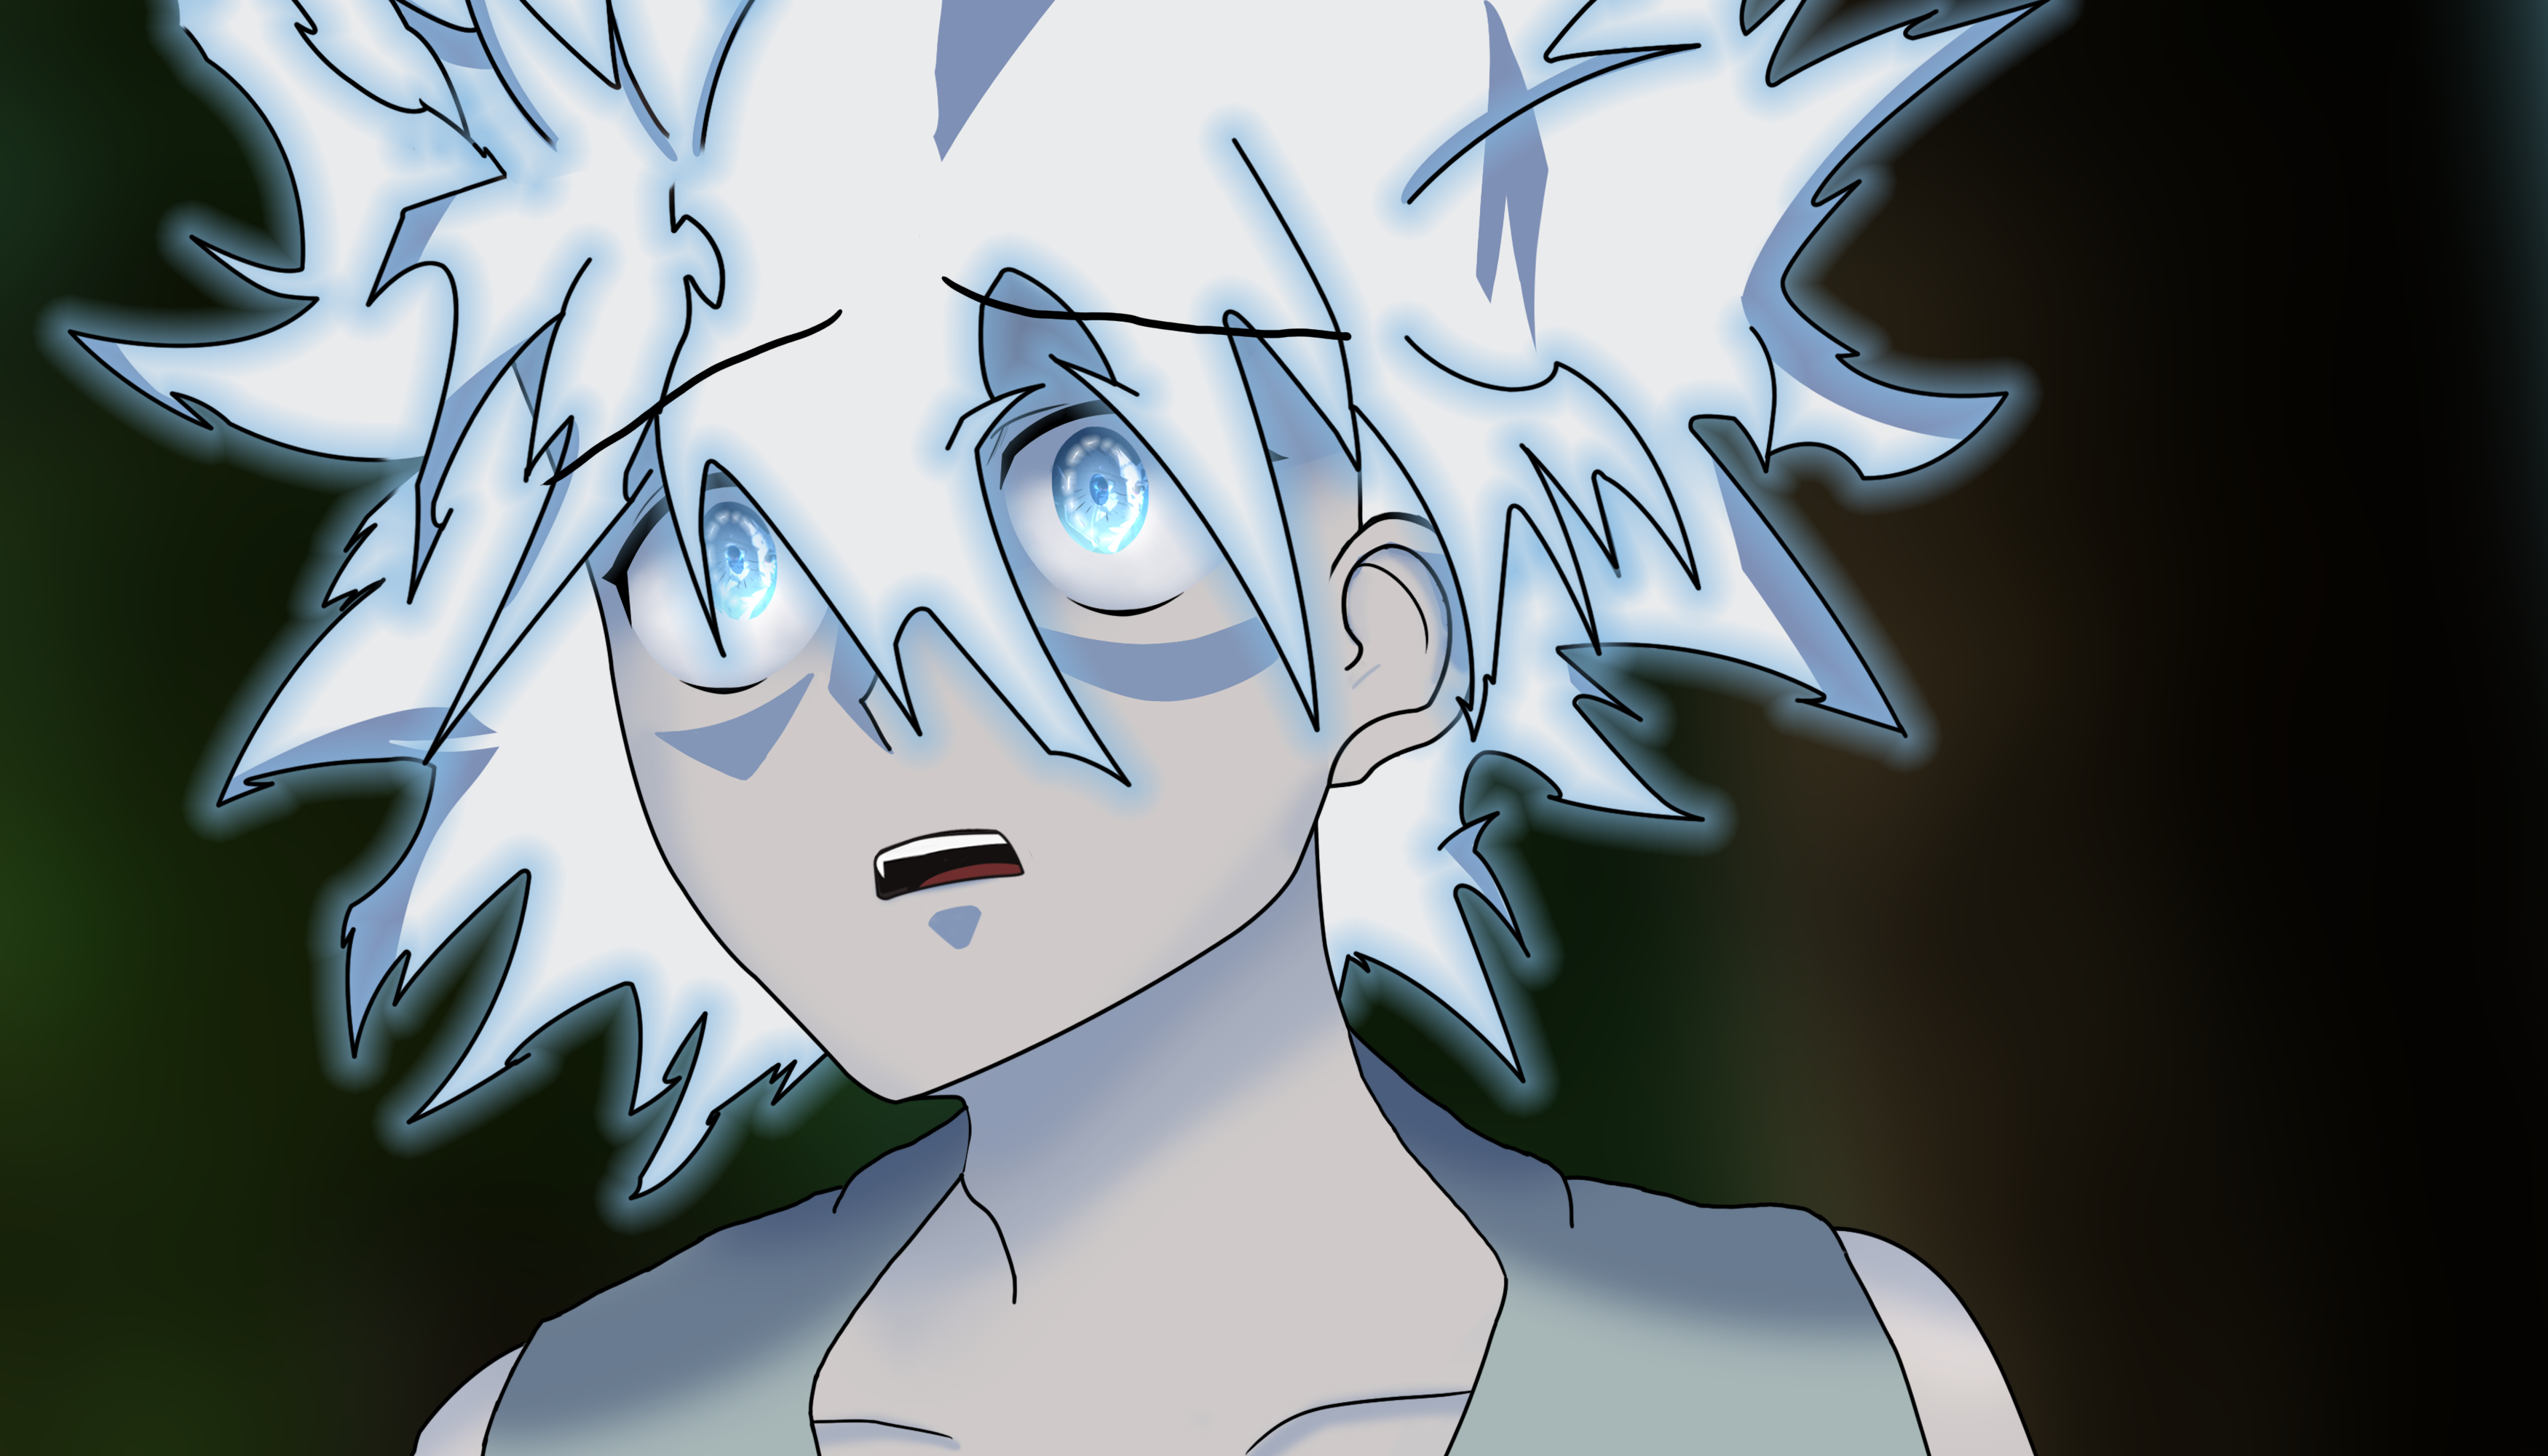 A melancholic HD wallpaper featuring Killua Zoldyck from Hunter x Hunter, capturing the essence of sadness in anime.